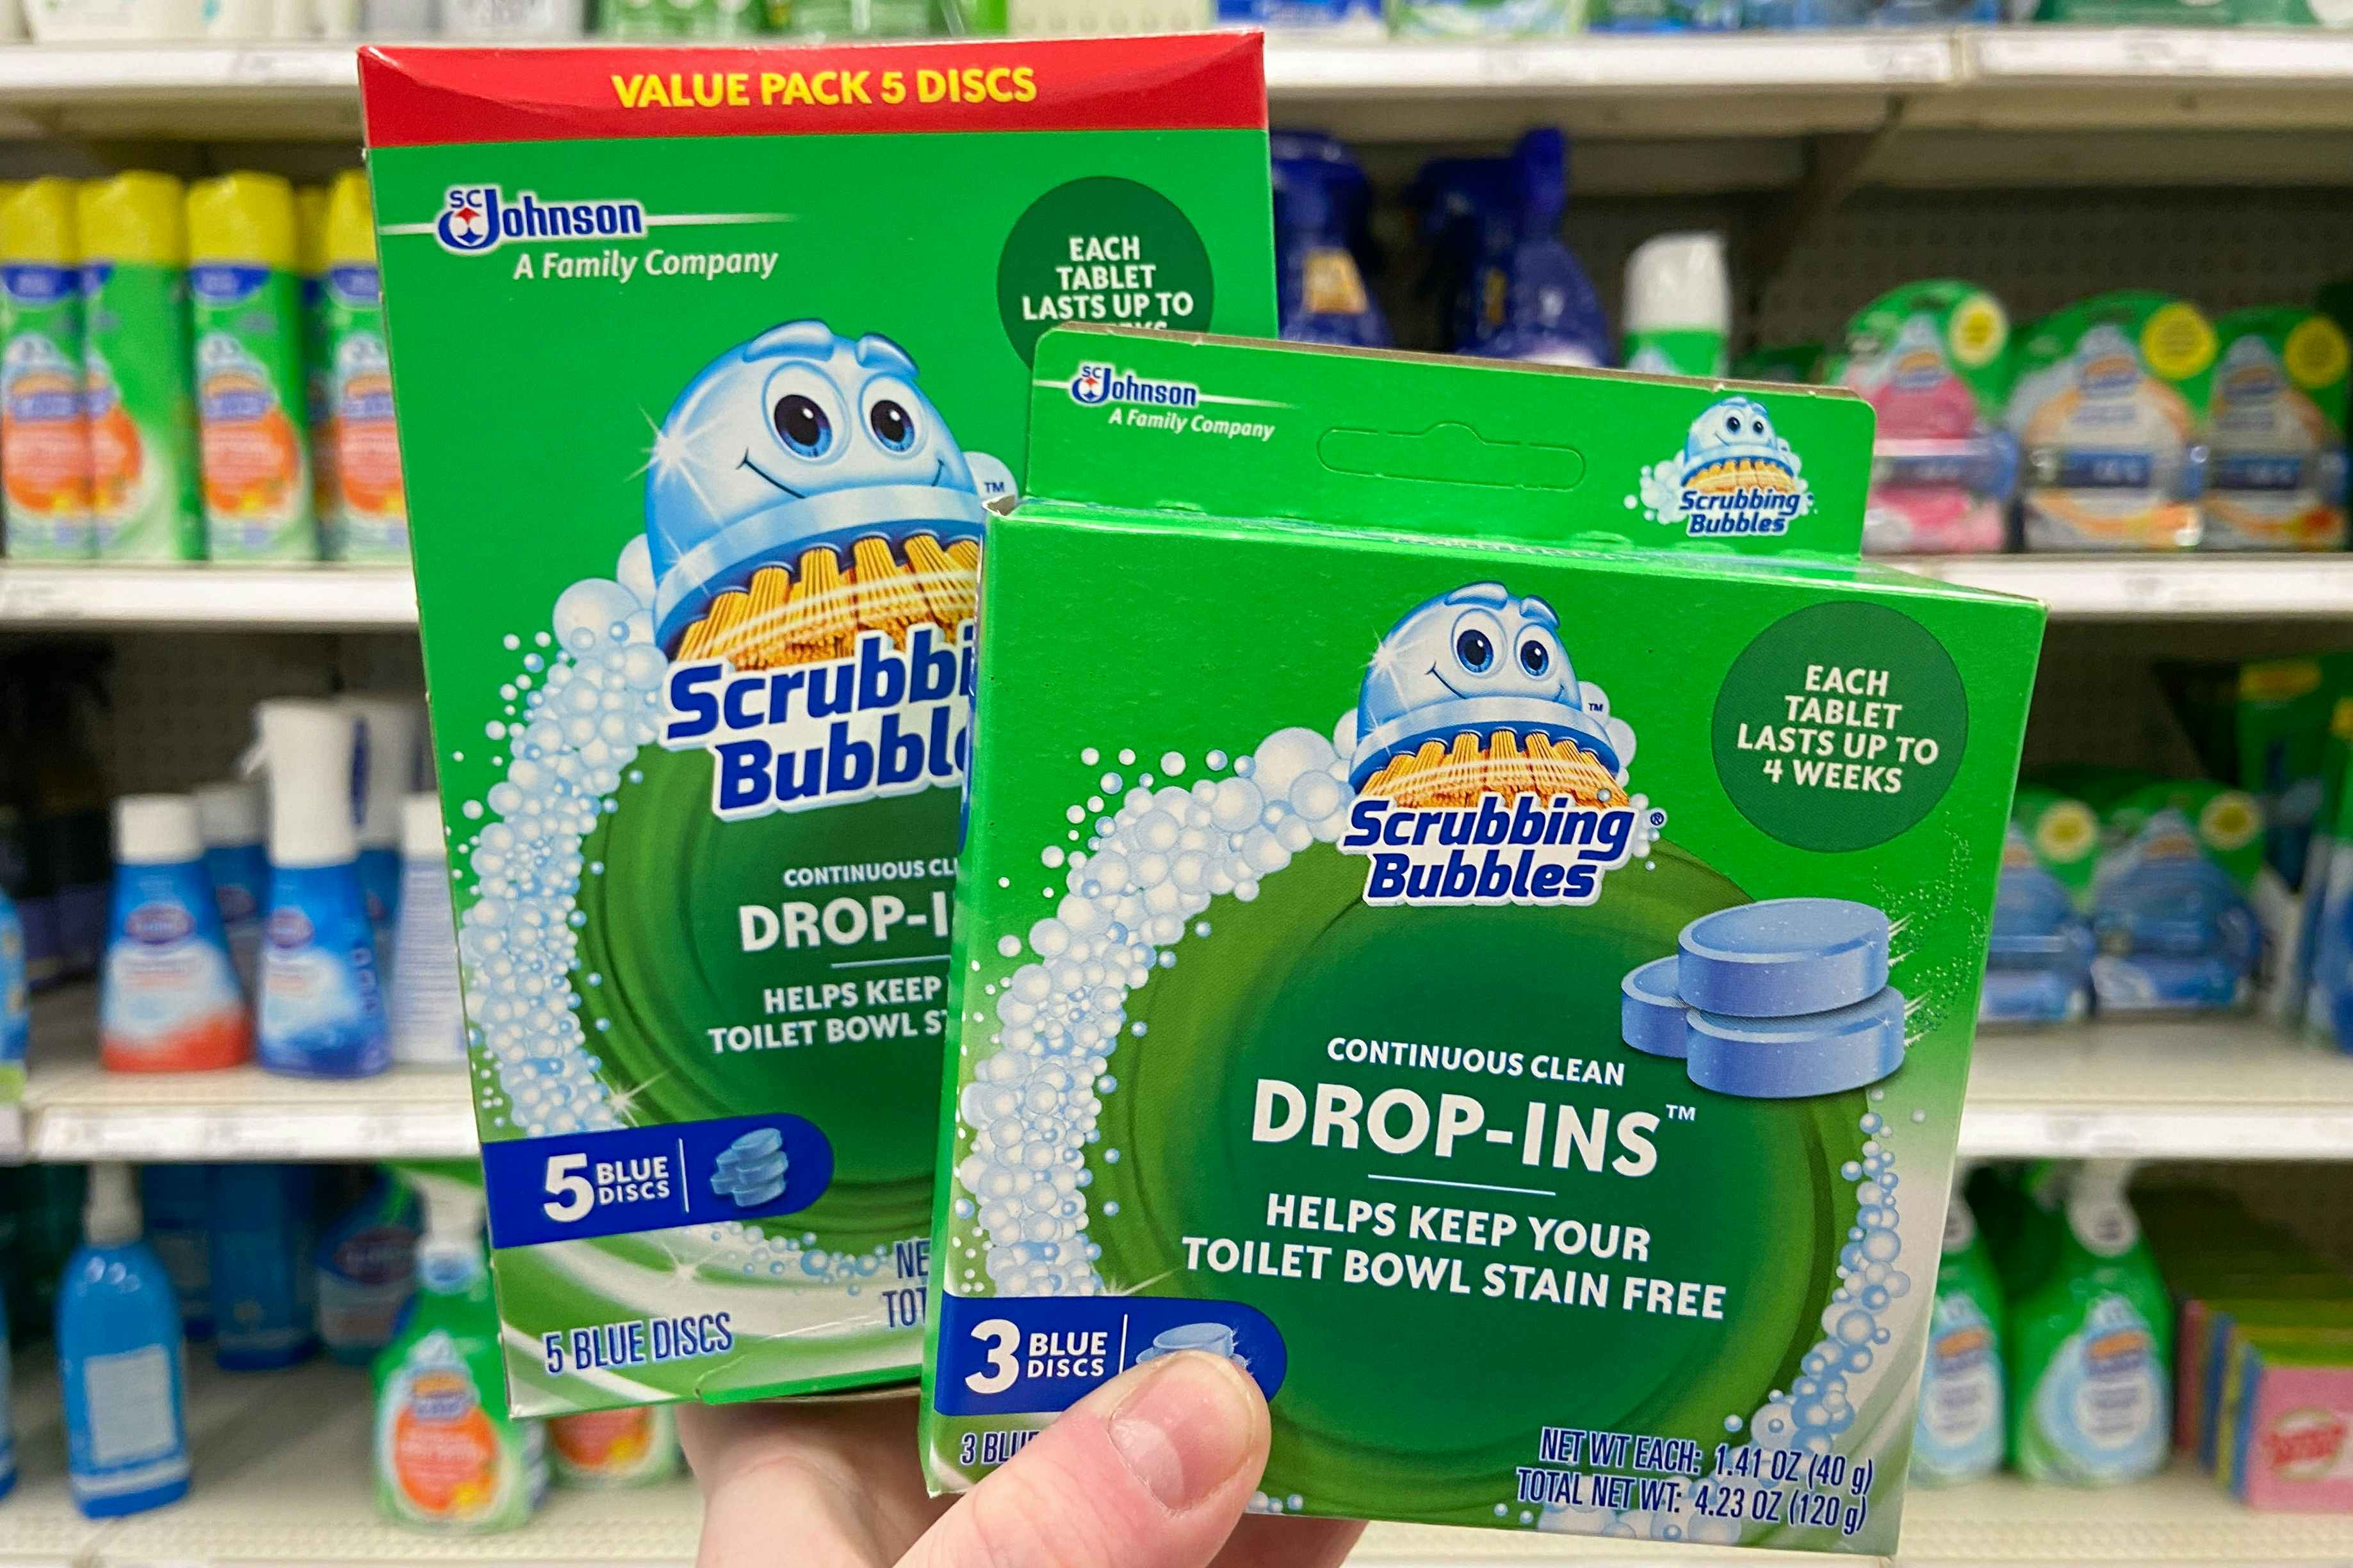 Scrubbing Bubbles Toilet Tablets, as Low as $3 on Amazon